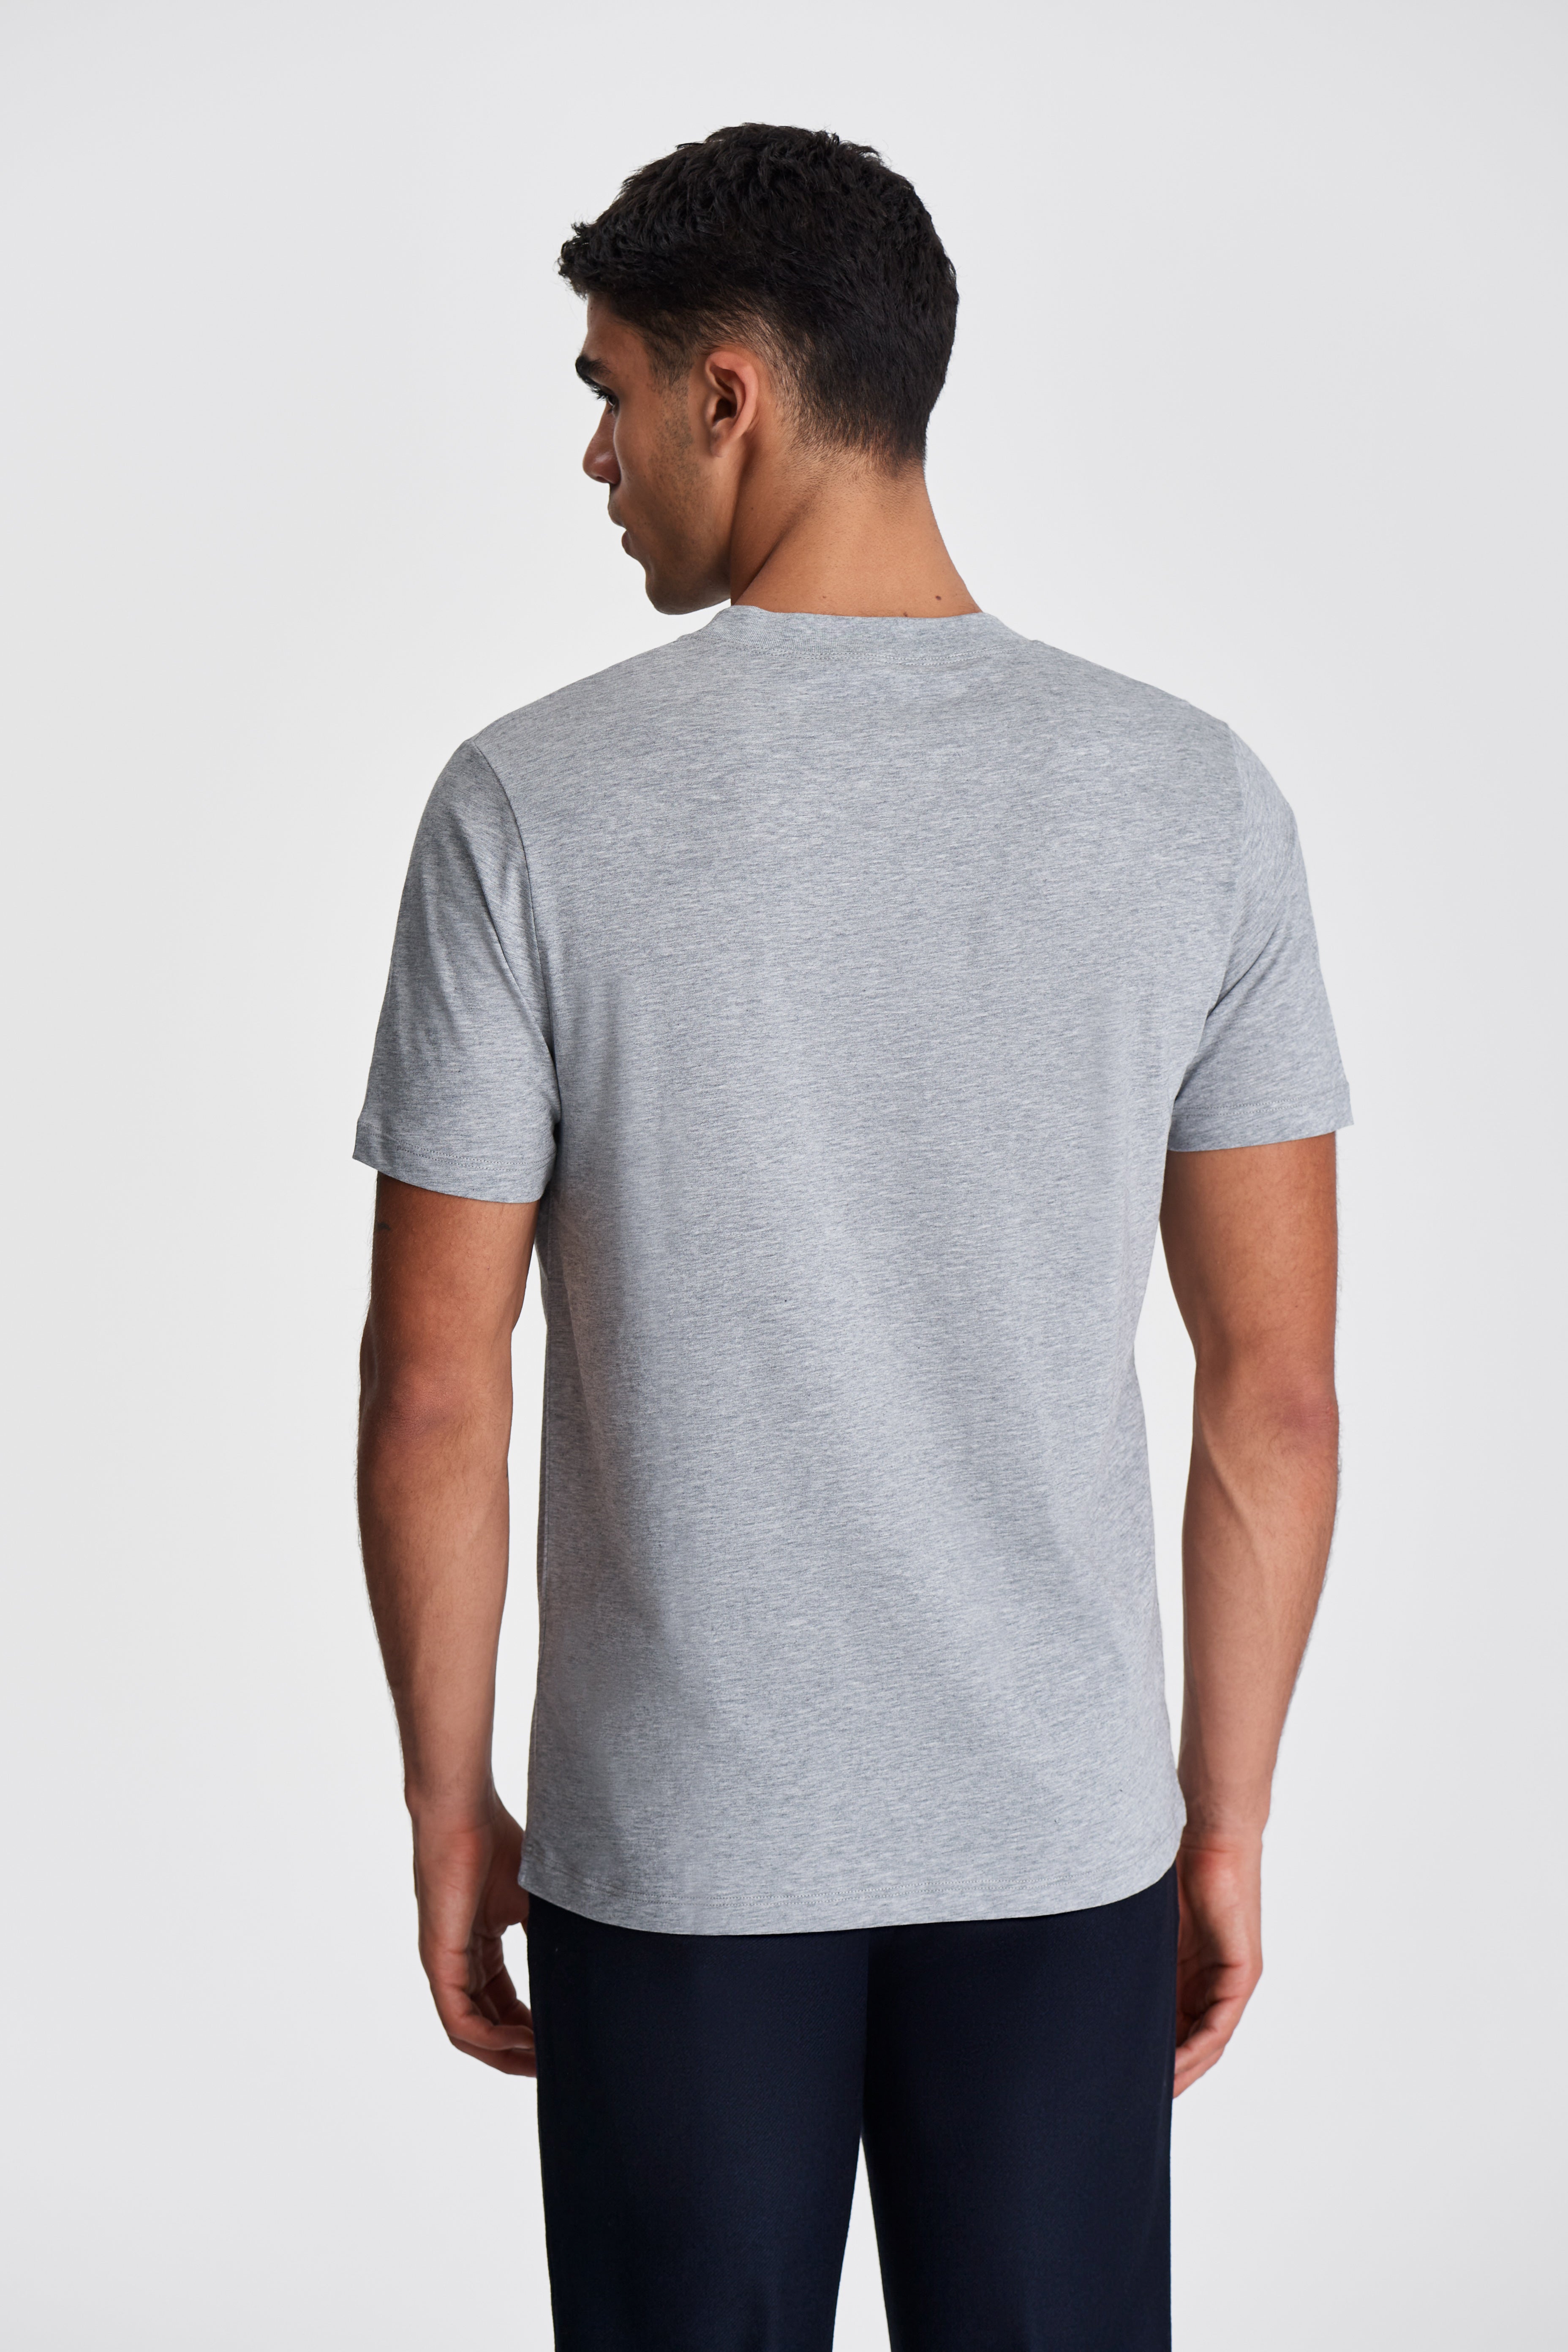 Cotton Wide Collar Classic T-Shirt Grey Model Back Image